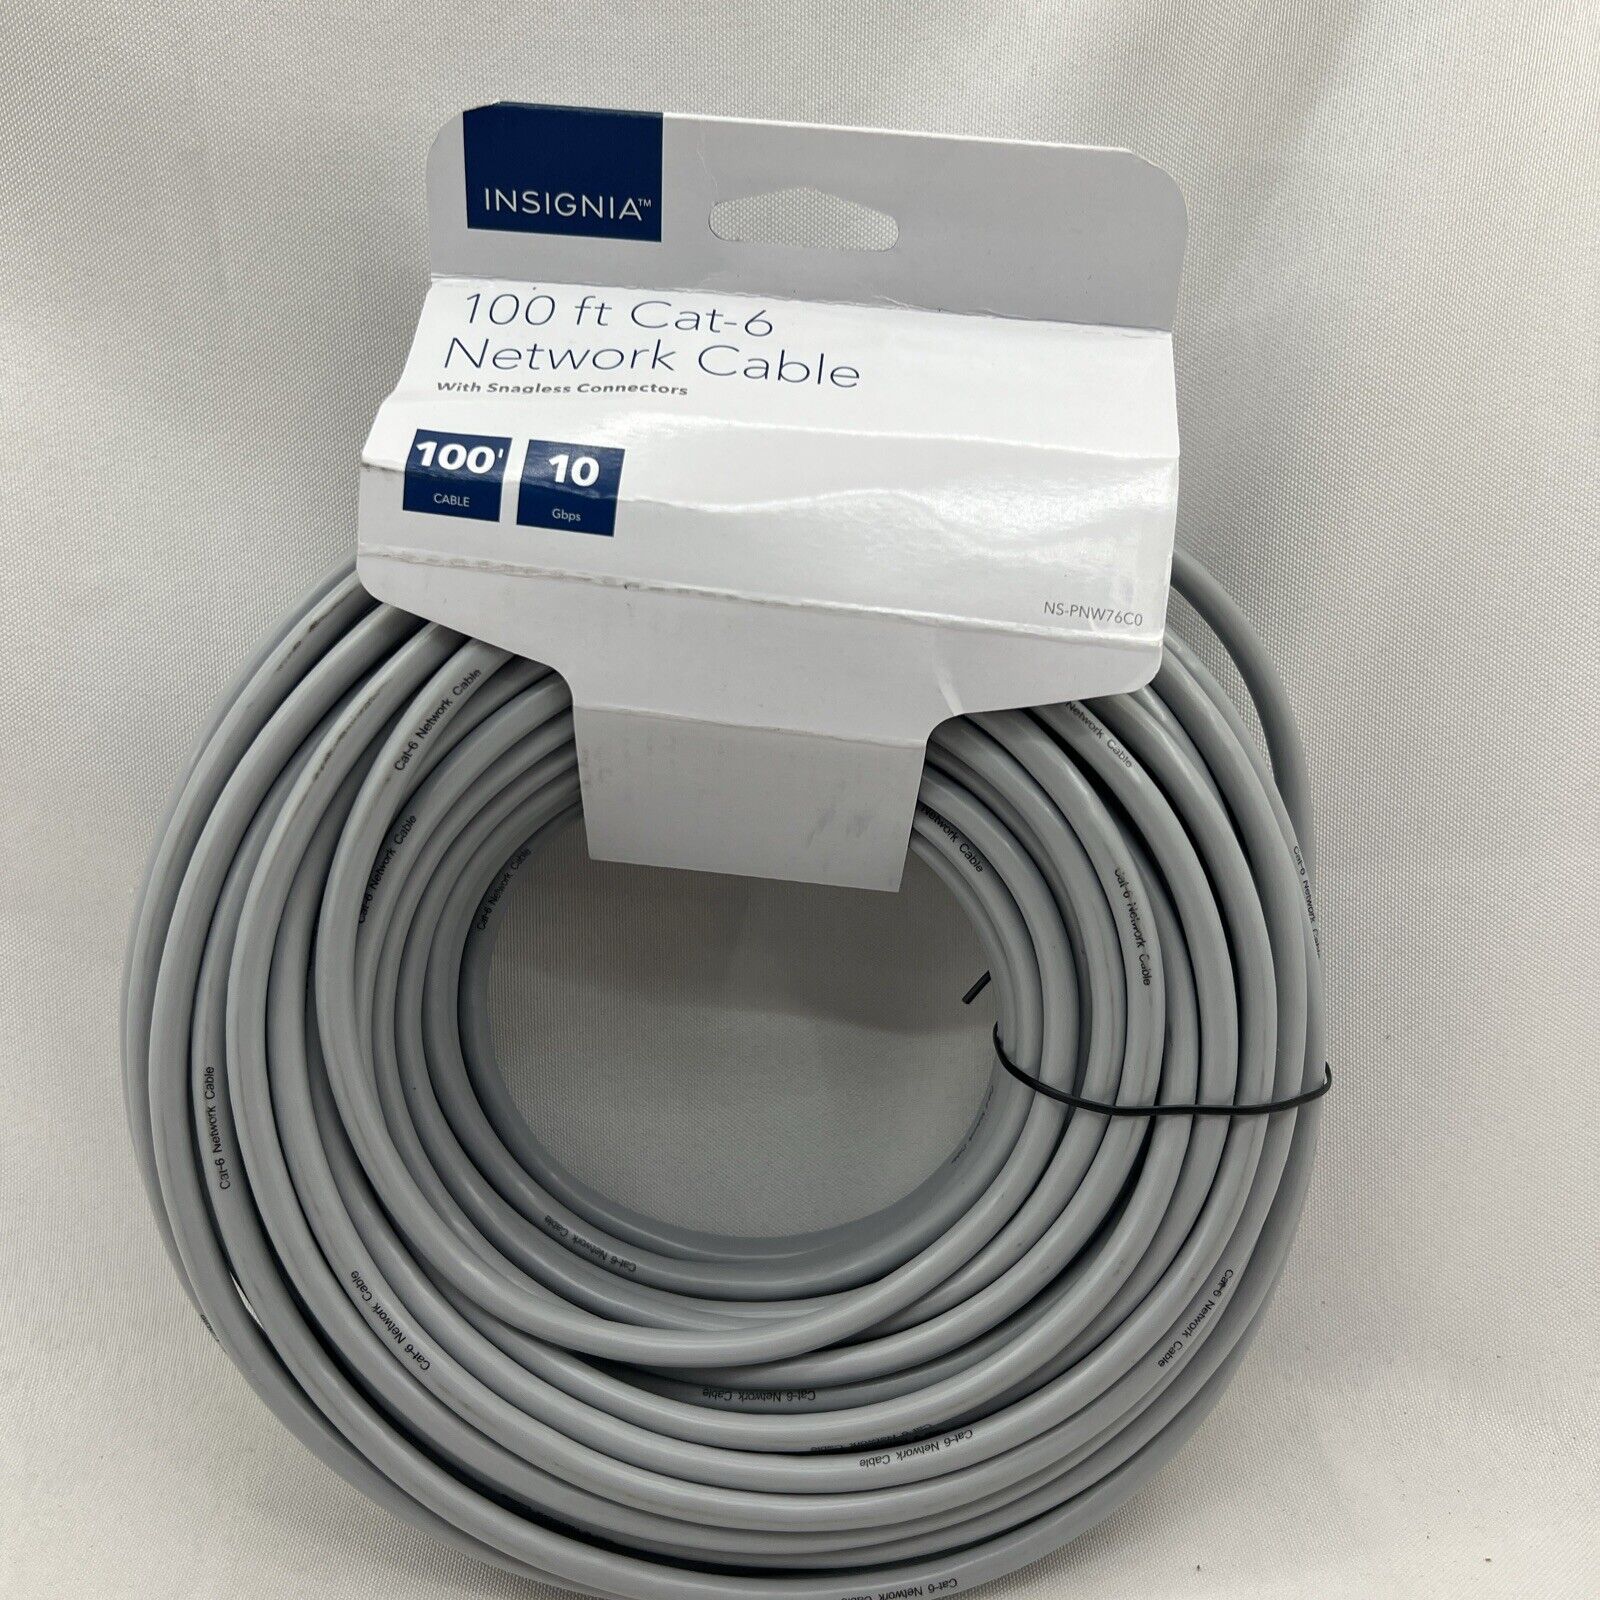 Insignia™ - 100' Cat-6 Ethernet Cable - Gray - NS-PNW76C0 - 